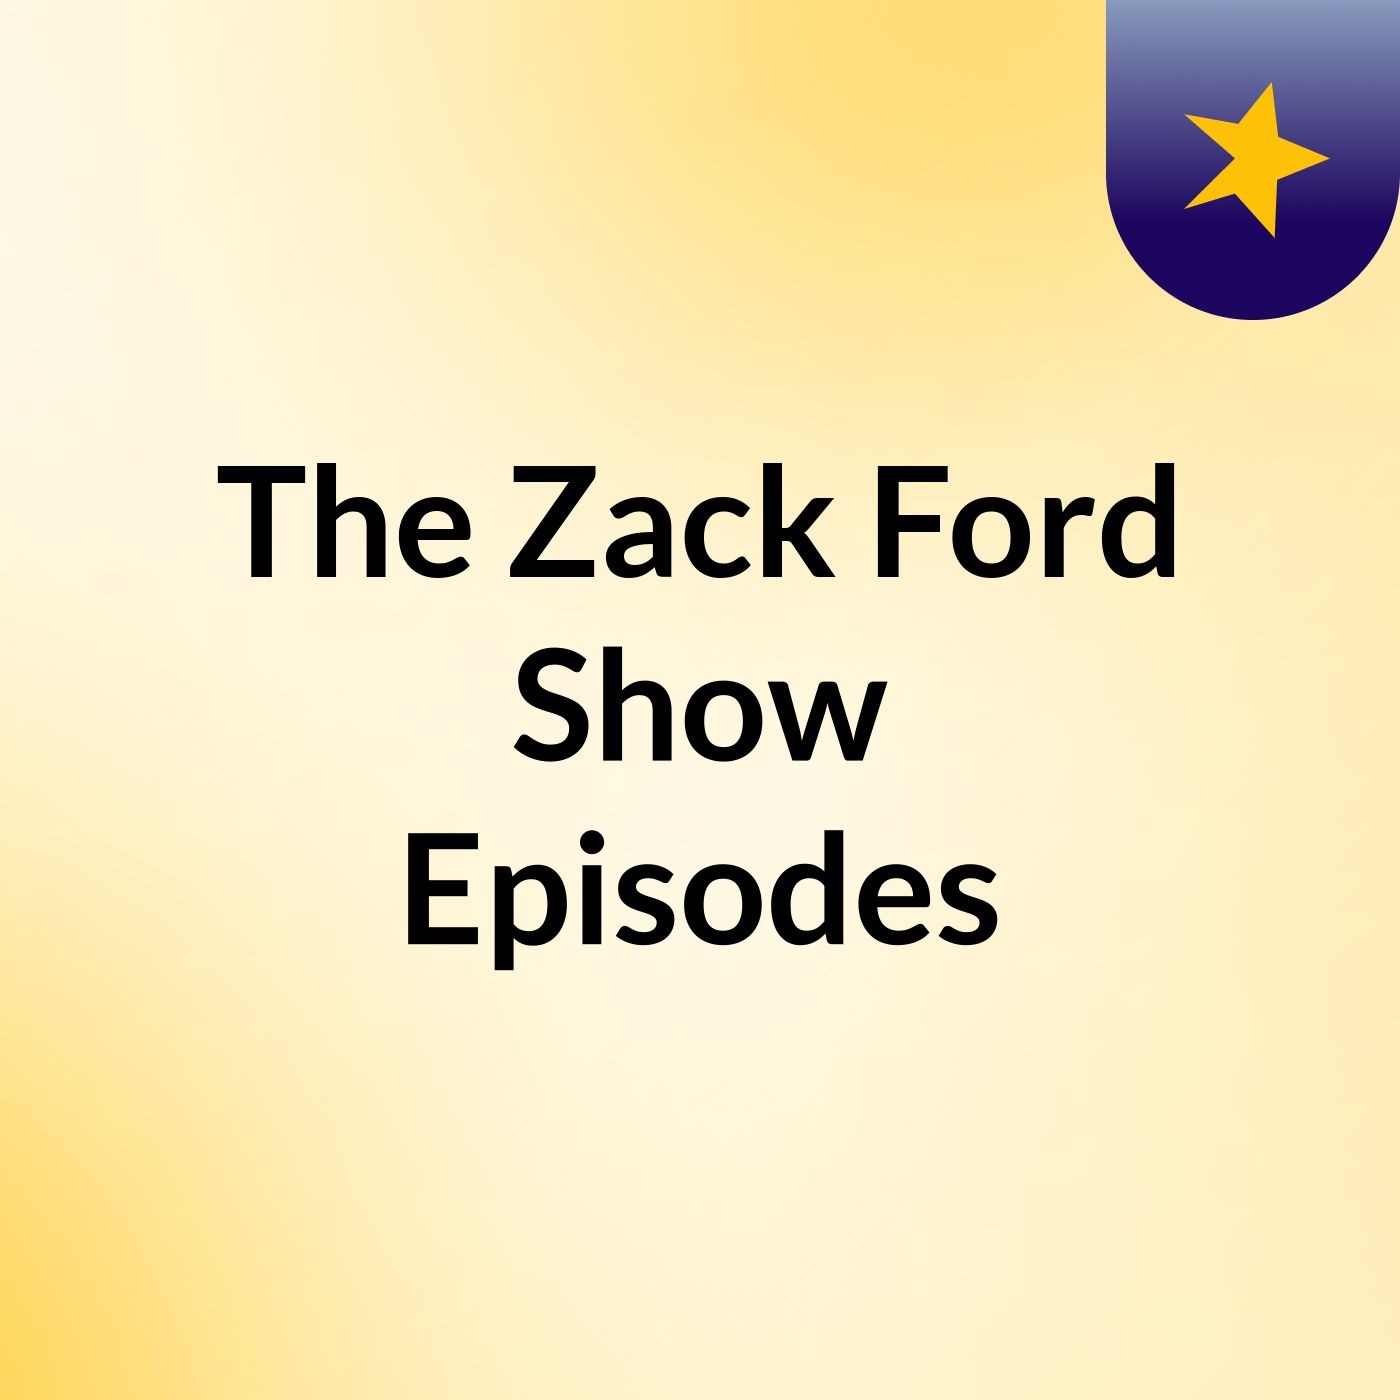 The Zack Ford Show Episodes